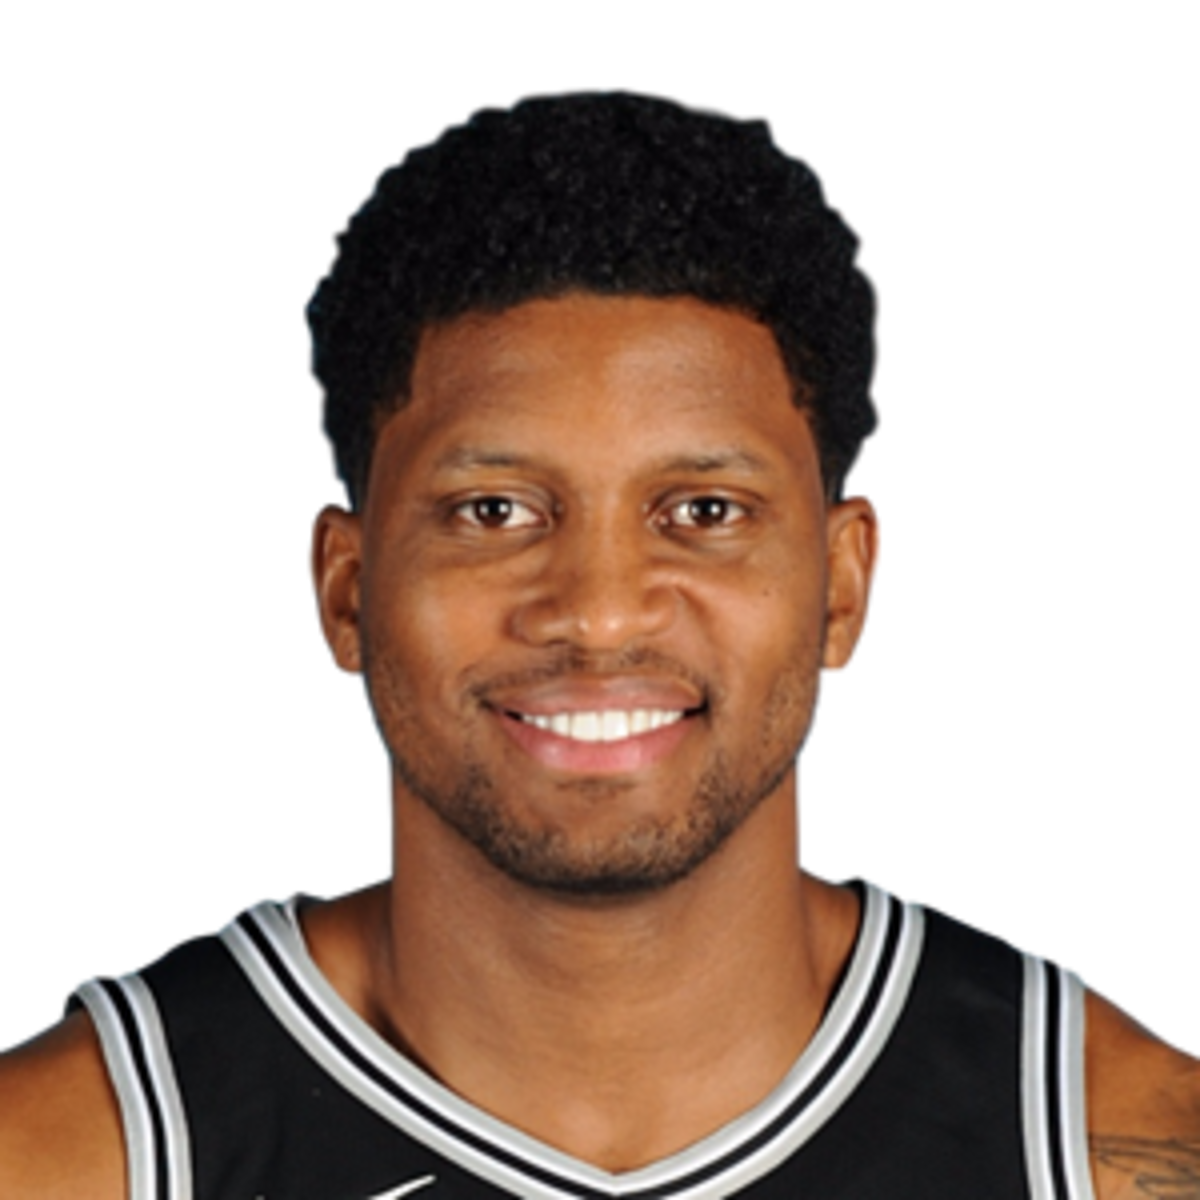 rudy gay teams he played for